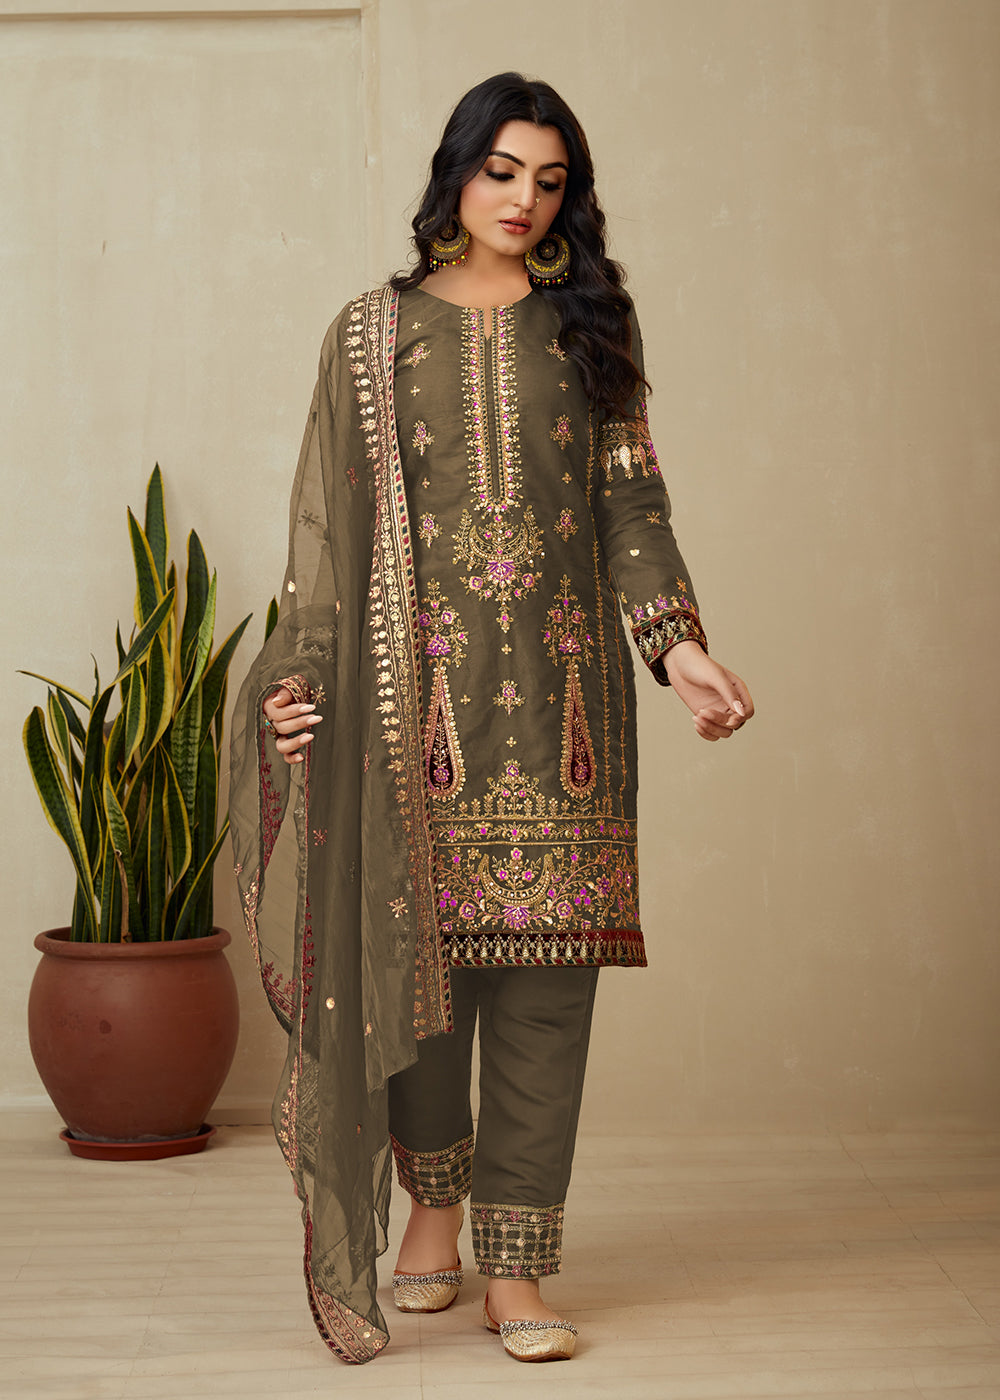 Buy Now Mehndi Green Organza Embroidered Traditional Salwar Kameez Online in USA, UK, Canada, Germany, Australia & Worldwide at Empress Clothing.